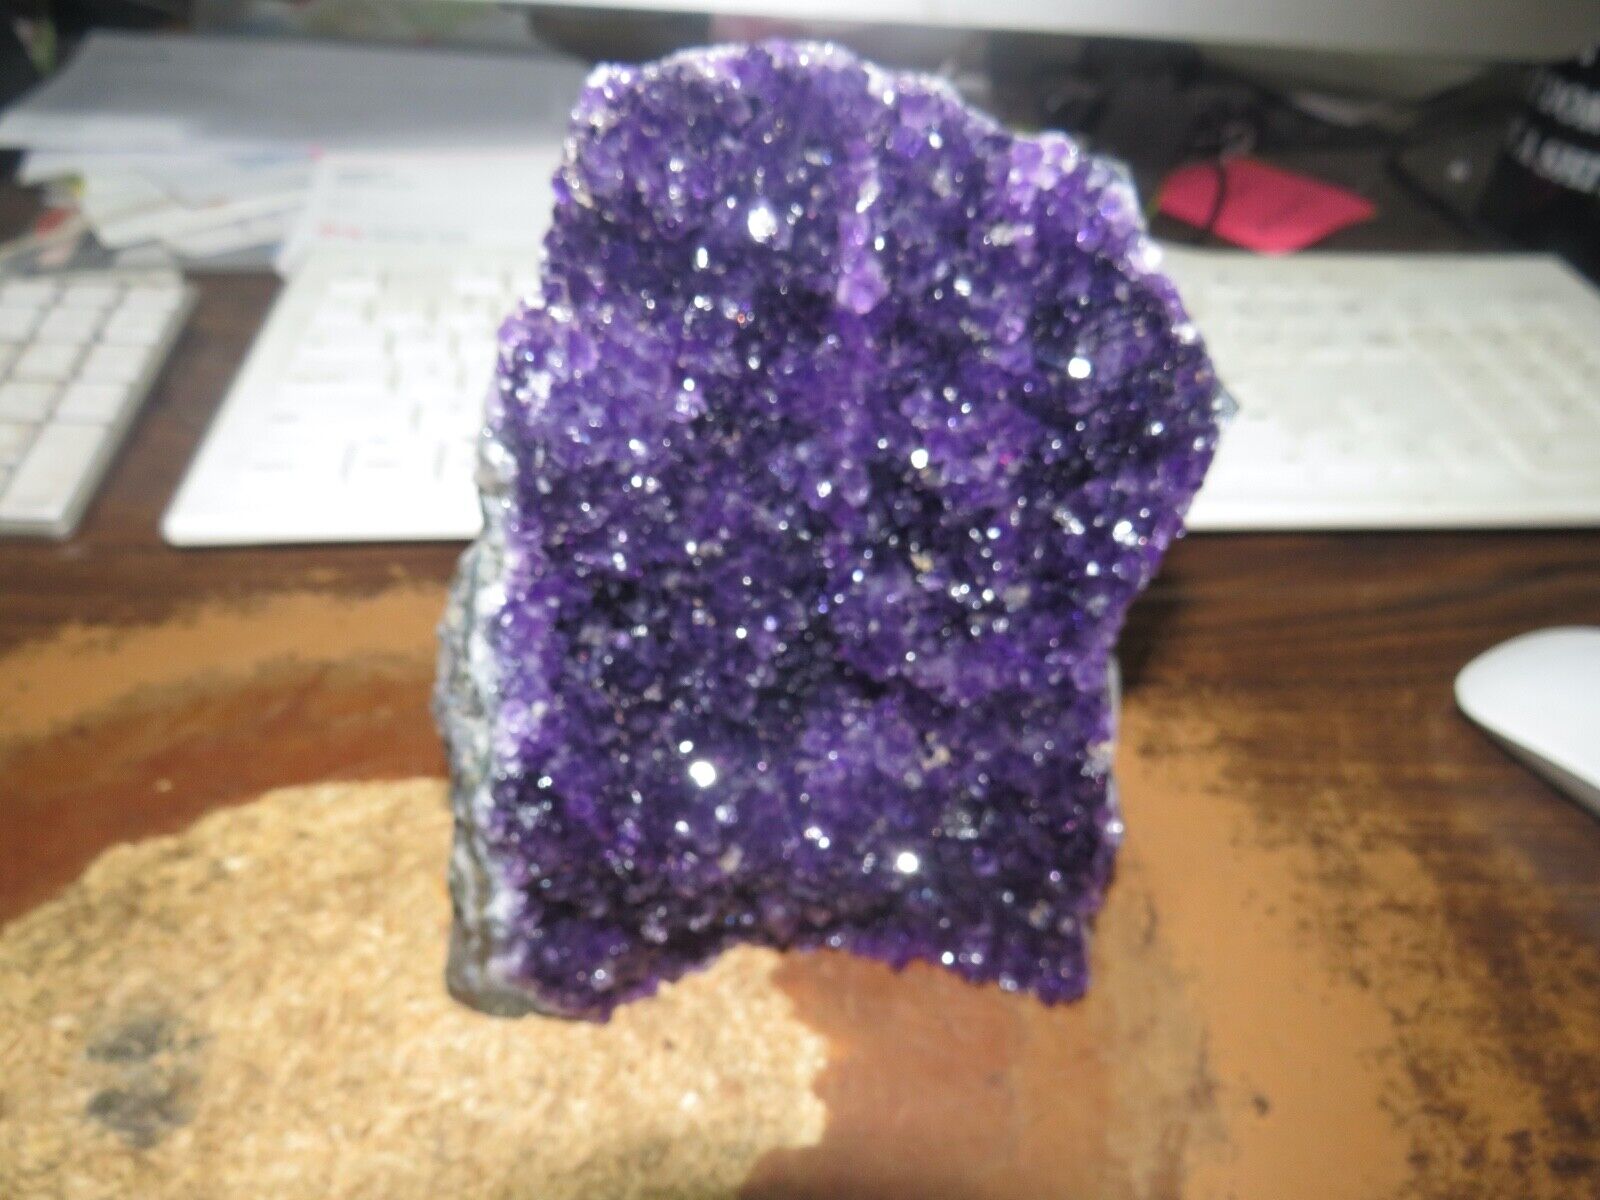 LARGE  AMETHYST CRYSTAL CLUSTER  GEODE FROM URUGUAY CATHEDRA  FORMATIONS